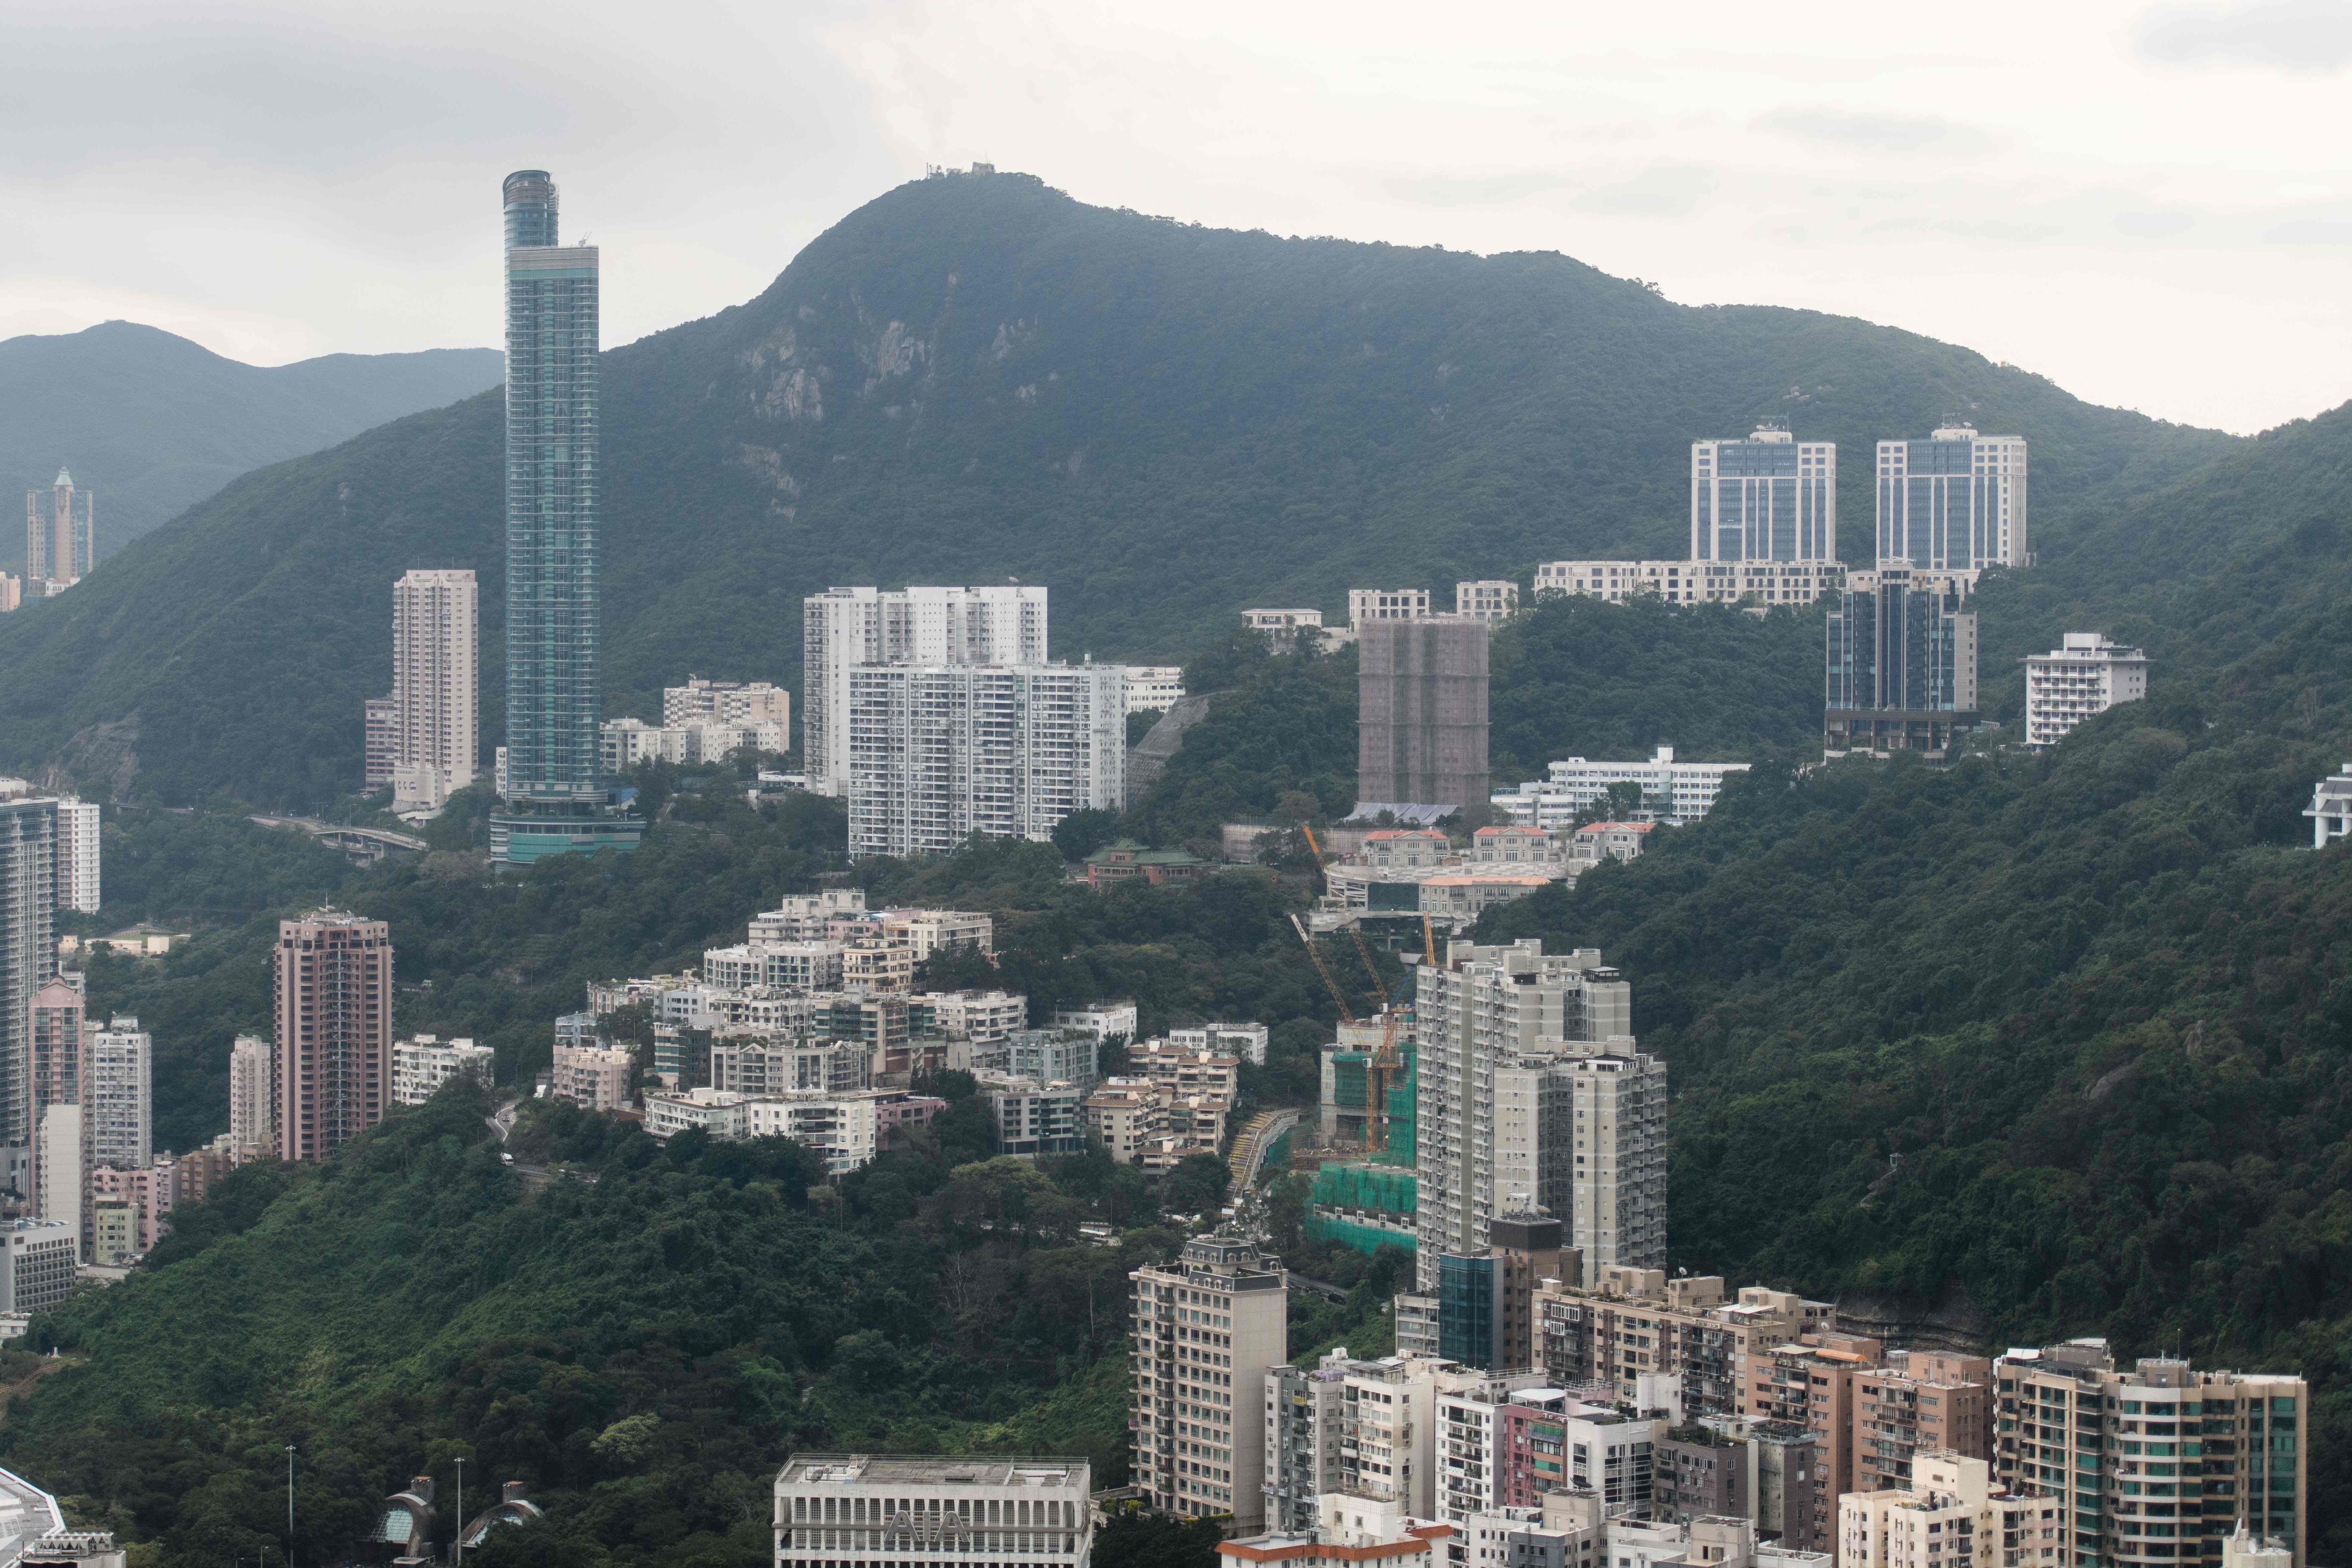 A record price for a home in Asia was set this month after two apartment units at Mount Nicholson (top right), a luxury housing development on The Peak in Hong Kong, were sold for HK$1.16 billion (US$149 million) to a single buyer. Hong Kong’s skyrocketing housing prices are a result of market distortions and irregularities, particularly in mortgages. Photo: AFP